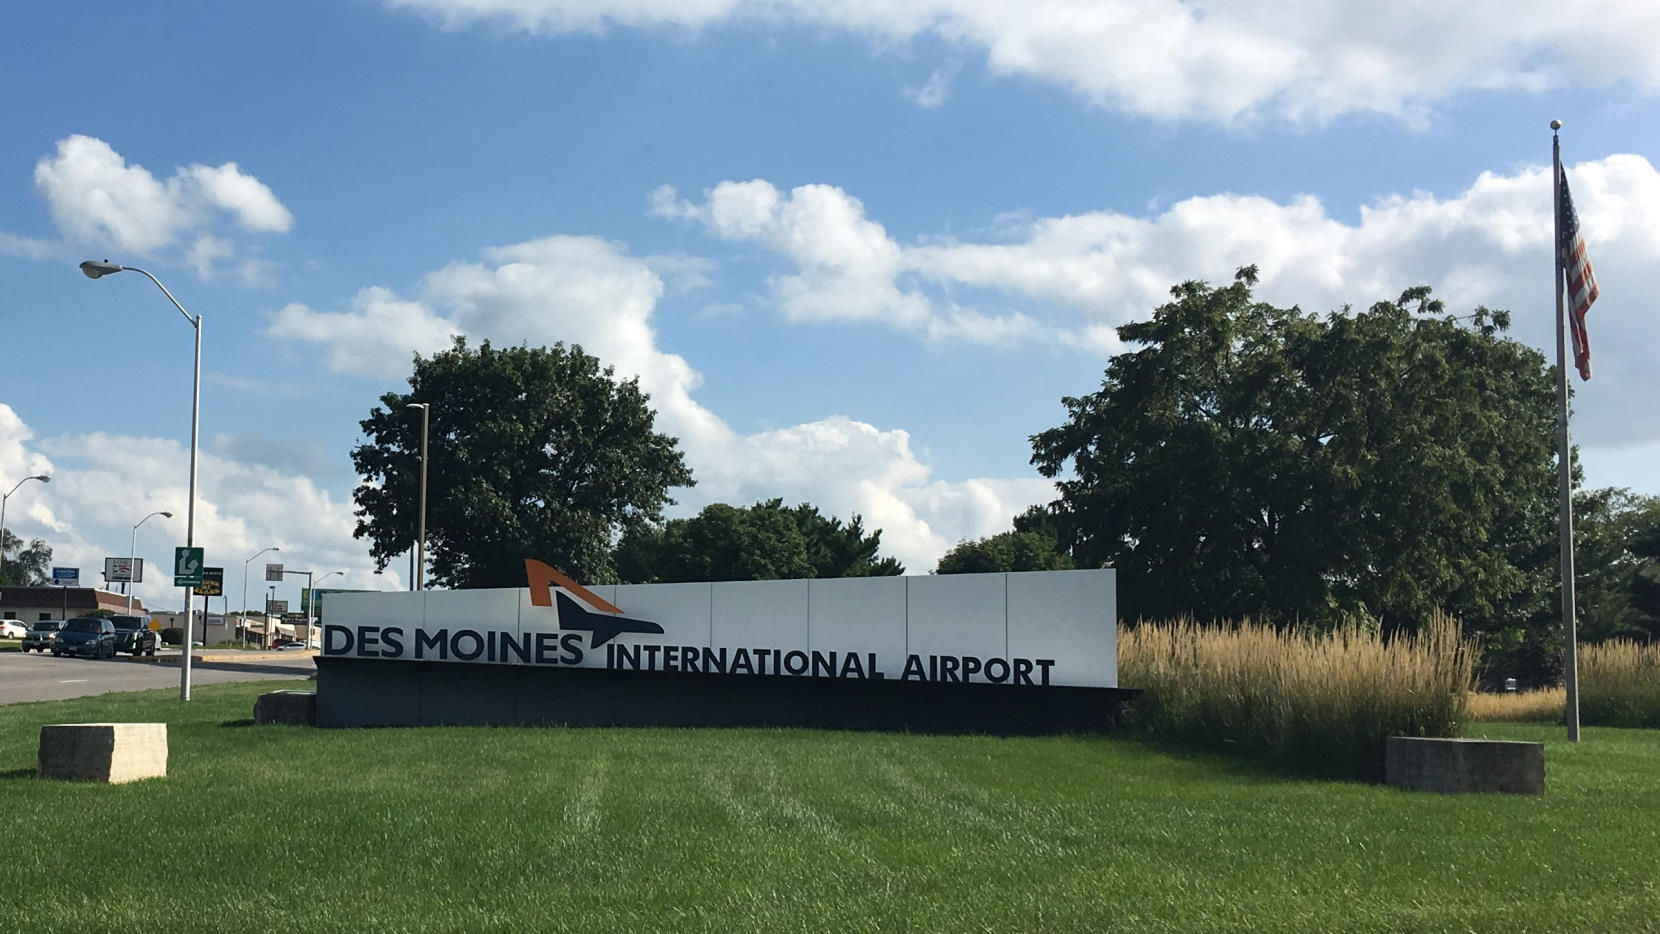 Des Moines International Airport sign on the airport's front lawn.